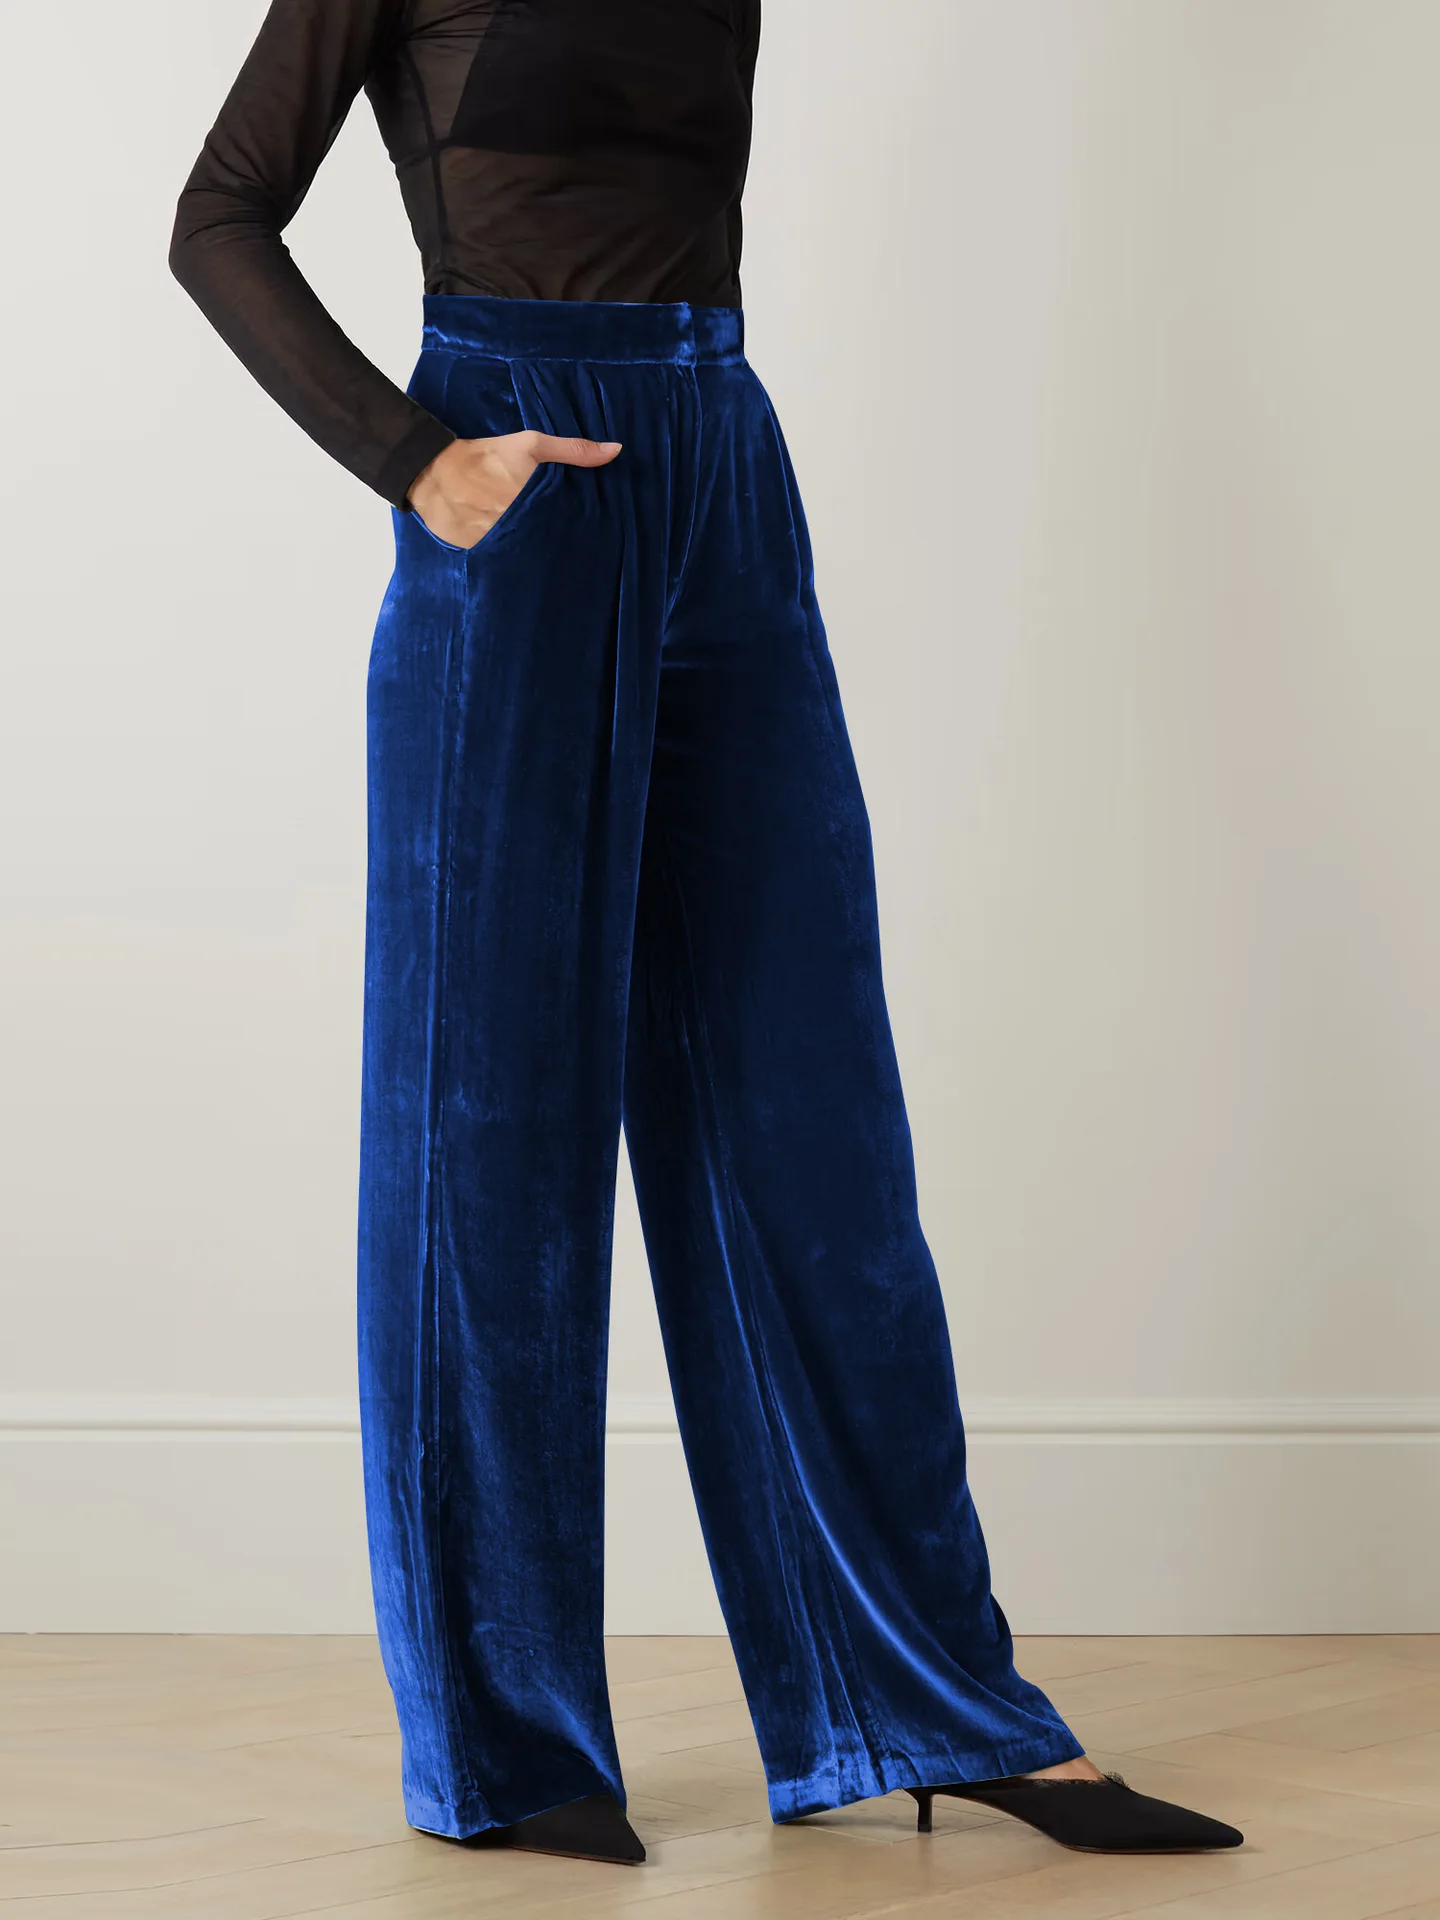 Summer Women Pants Solid Color Chic French Stylish Velvet Wide Leg Pants Autumn Female Trousers Office Lady Trendy Outfit C4916